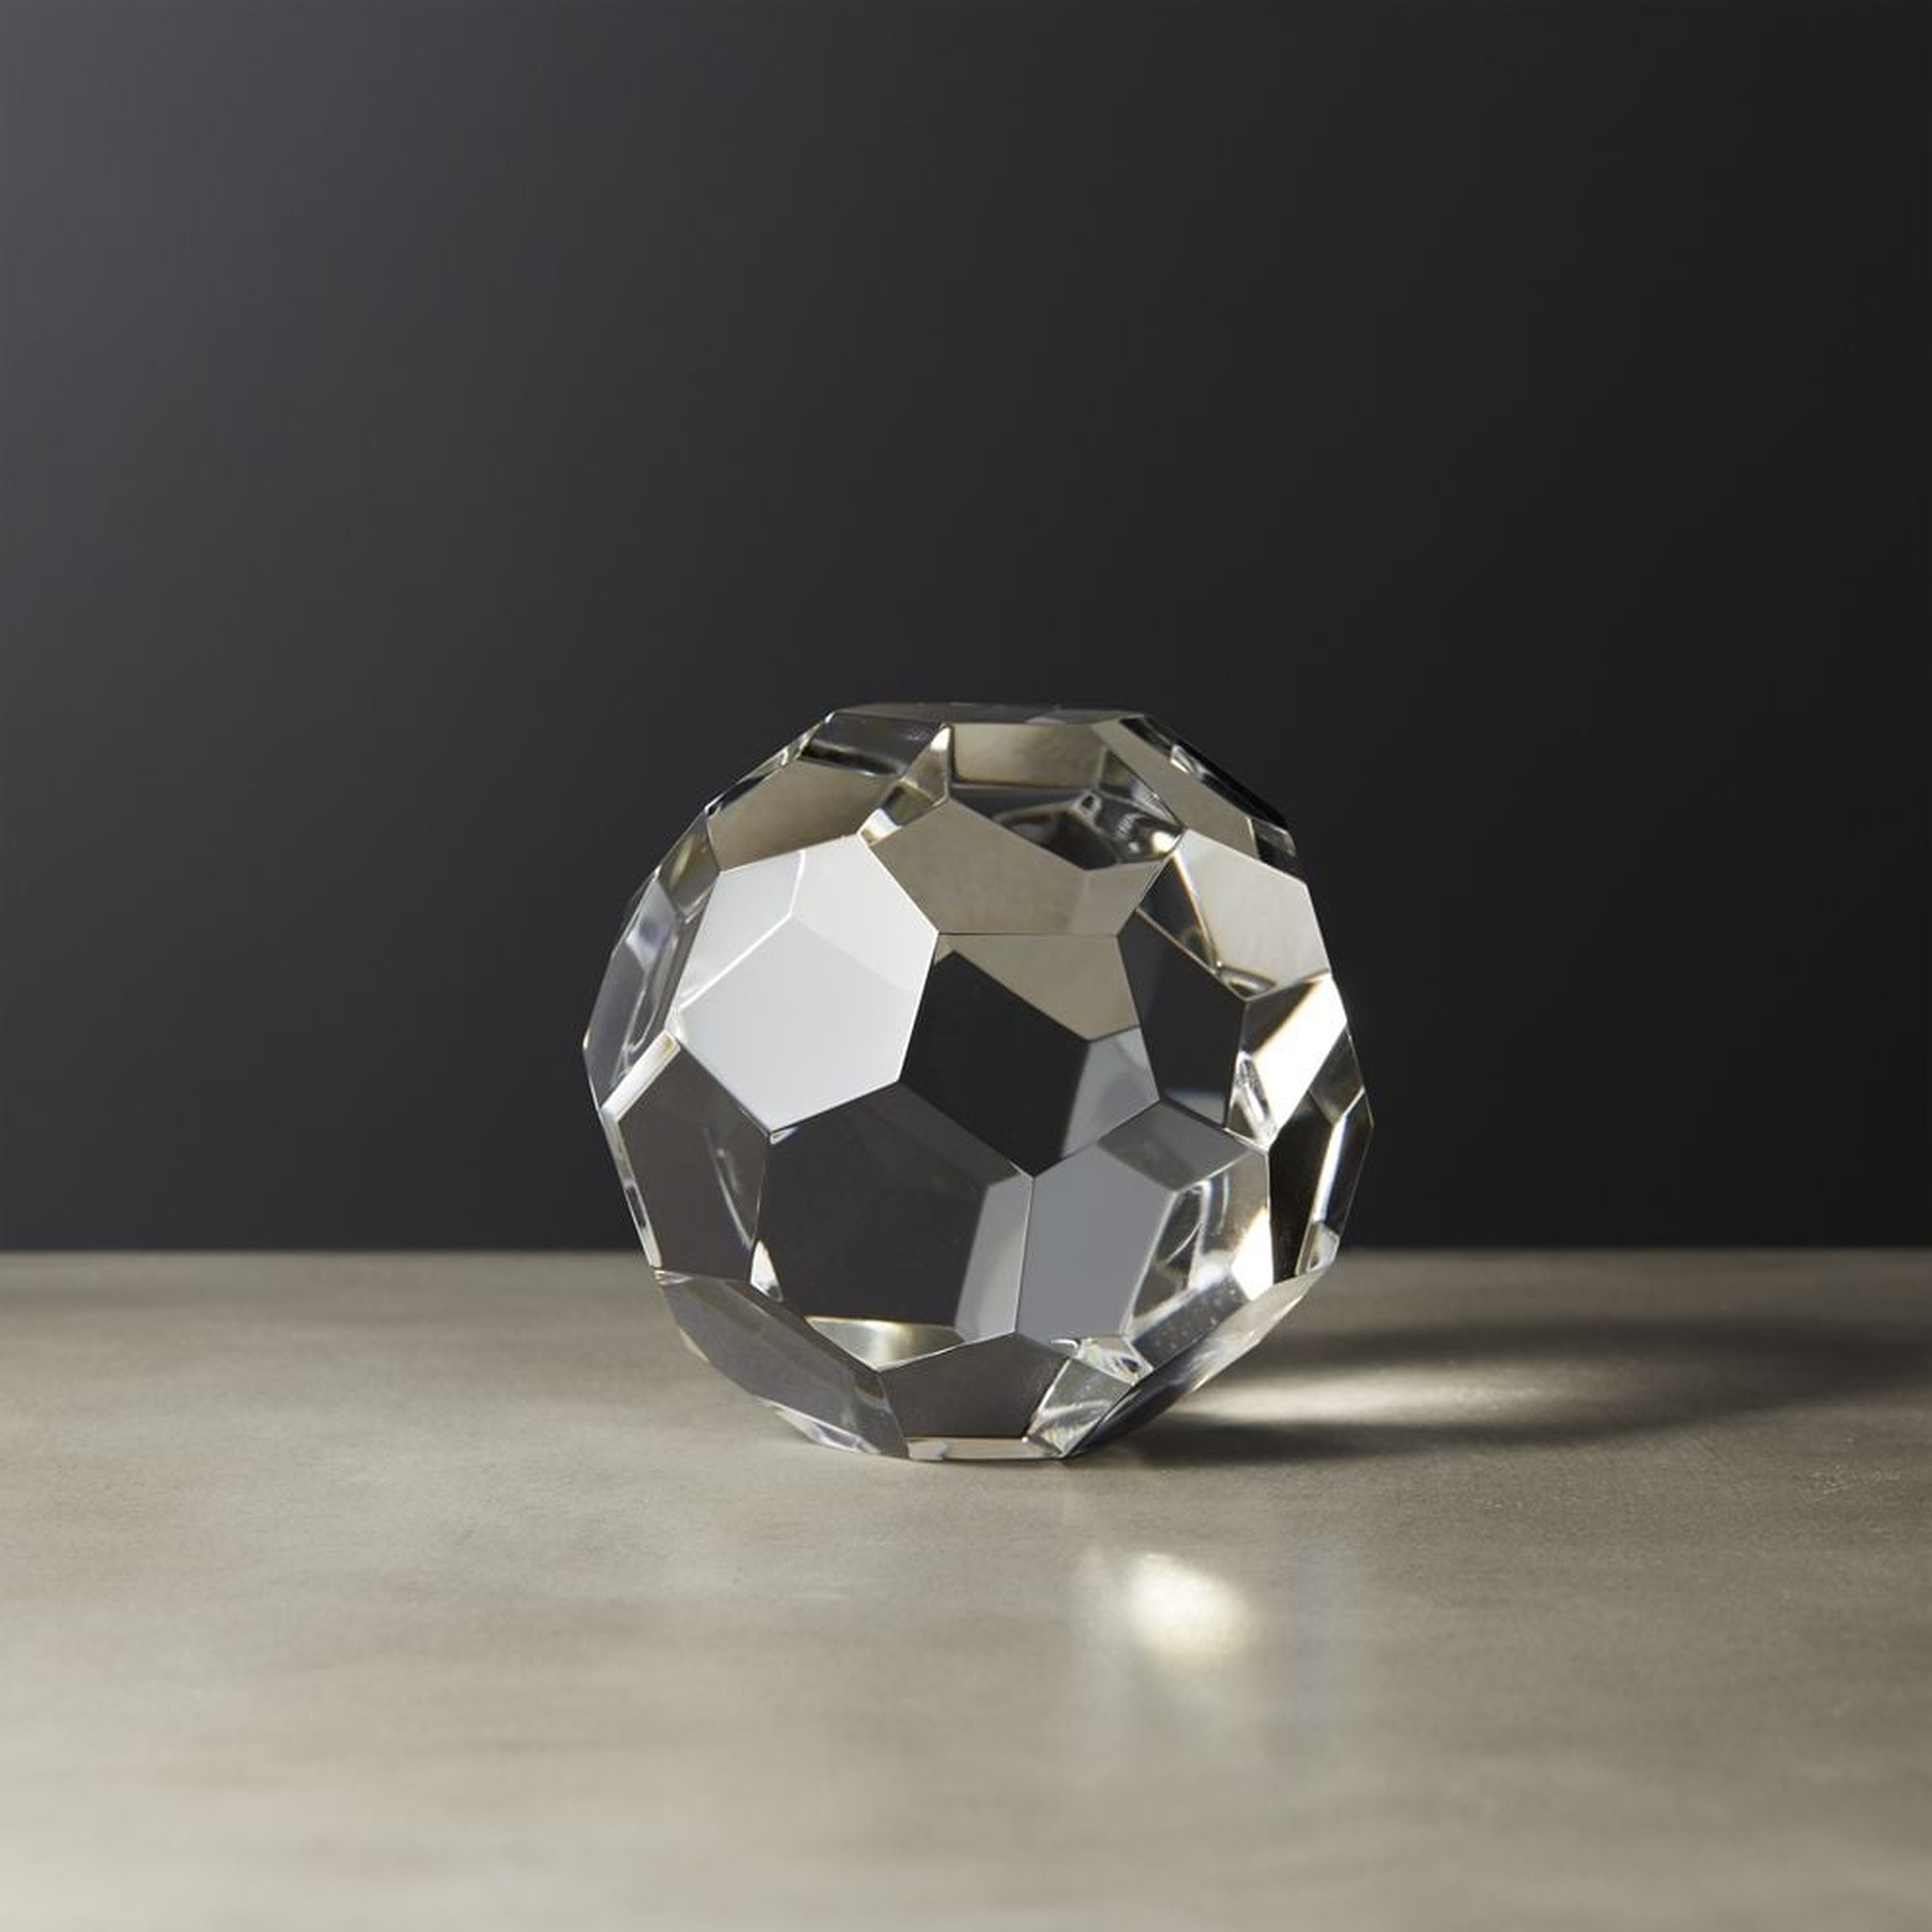 Andre Small Crystal Sphere - CB2